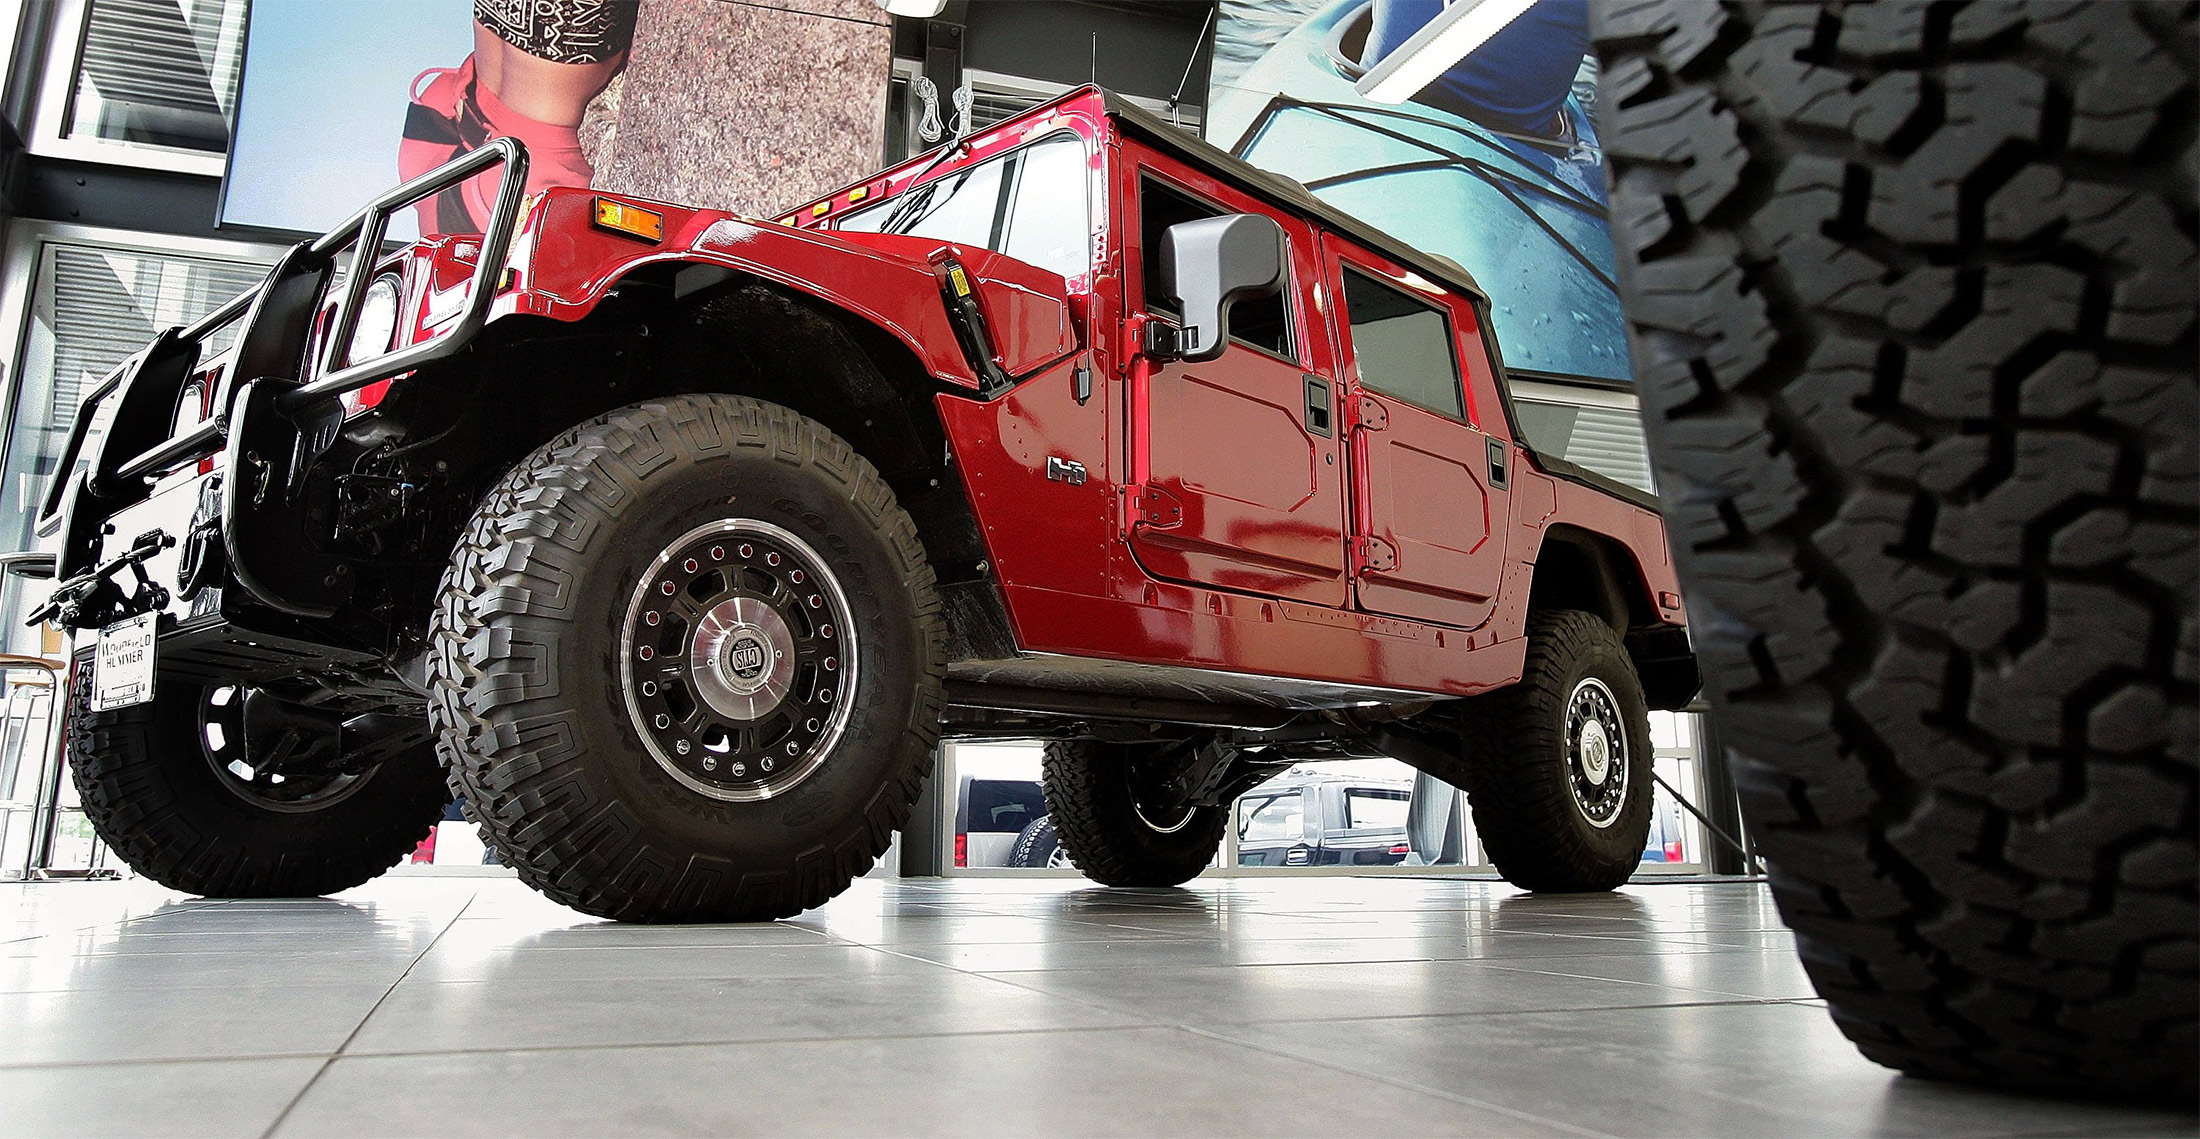 A Hummer H1 on display at a showroom in 2006.